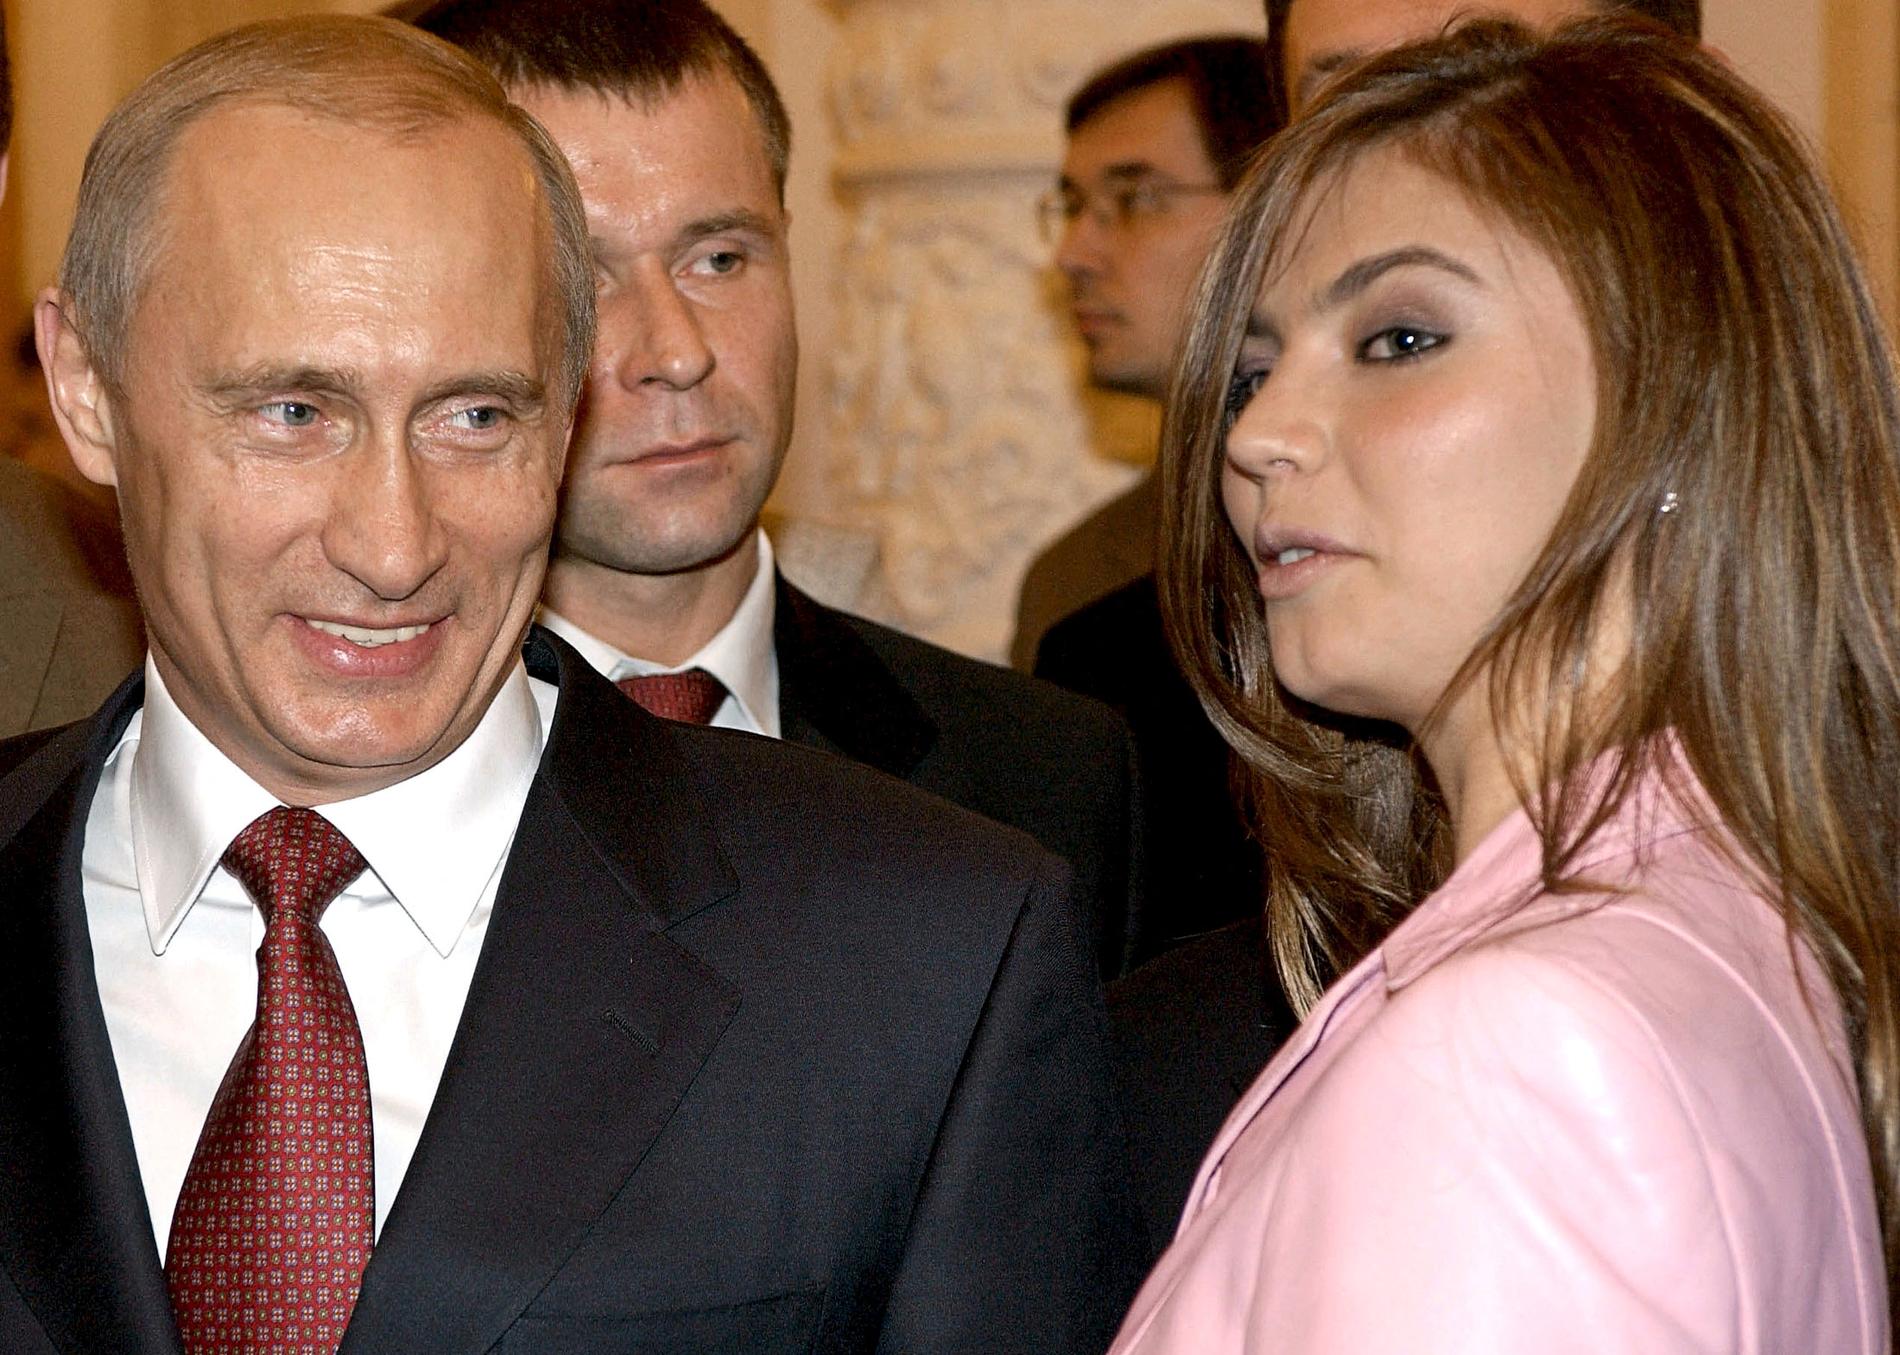 Russian media: a mansion built for Putin’s mistress – the area is now protected